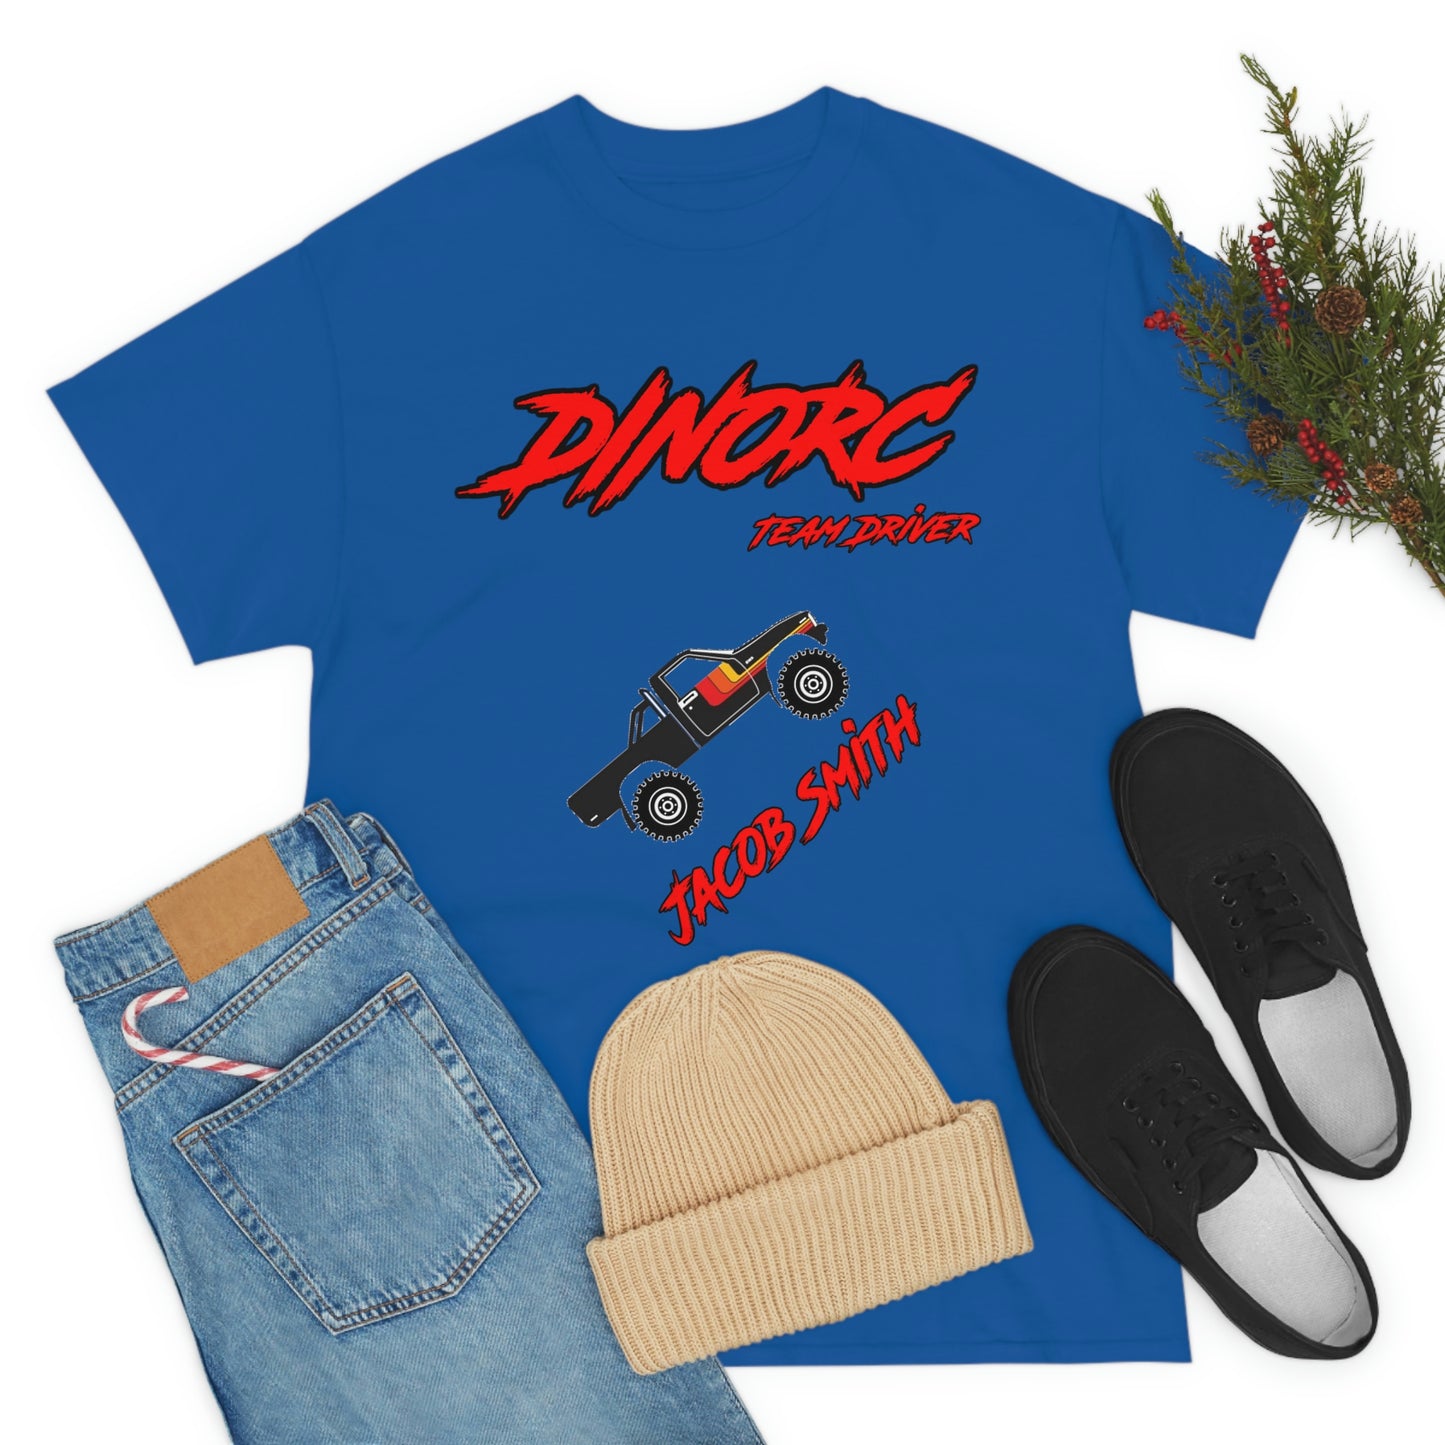 Team Driver Jacob Smith truck logo Front and Back DinoRc Logo T-Shirt S-5x 5 colors